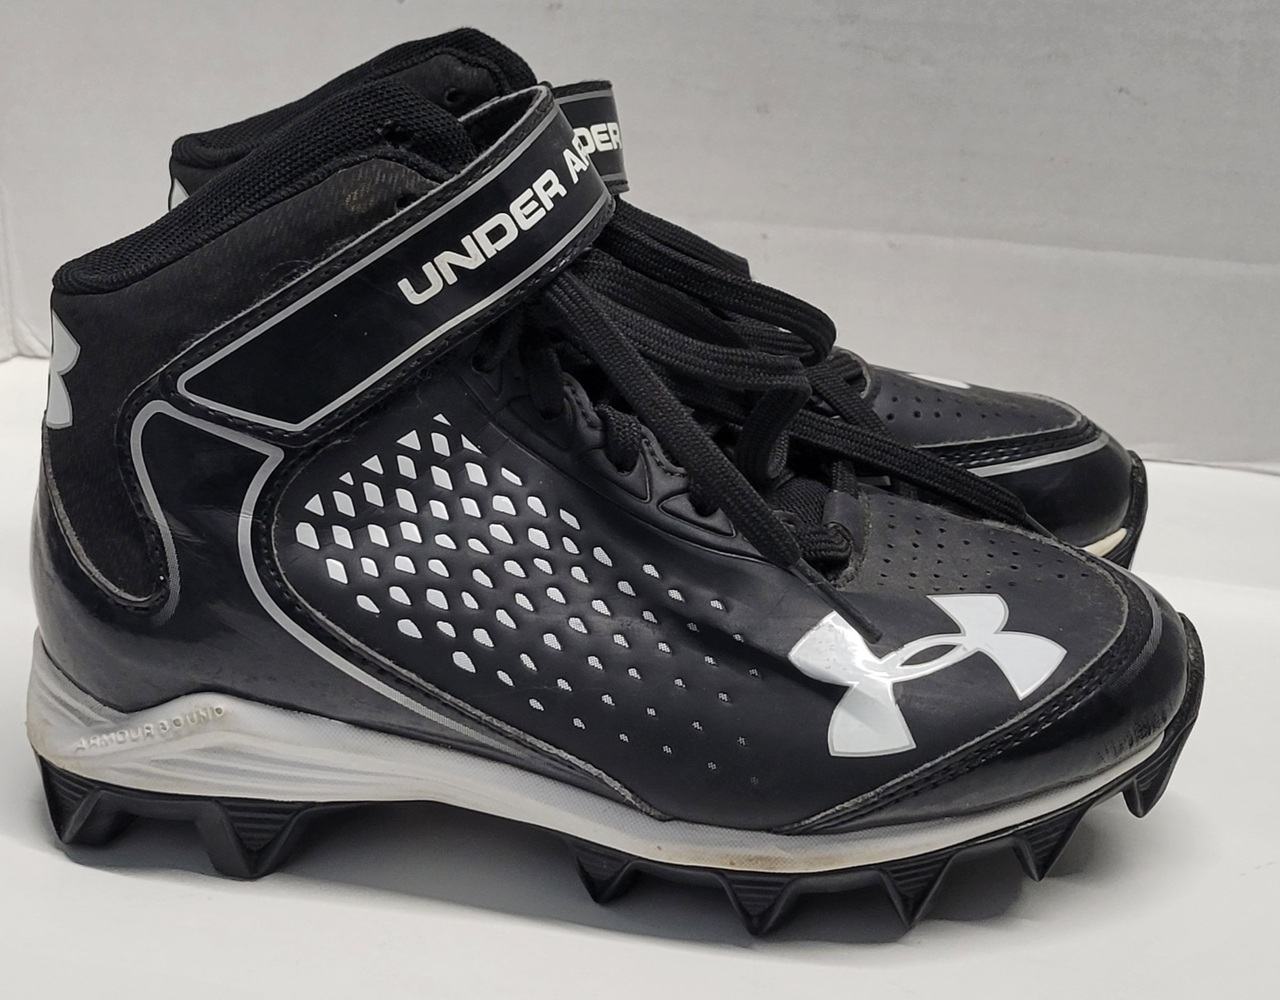 UNDER ARMOUR - ARMOUR BOUND CLEATS SIZE 1 Avenue Shop Swap & Sell